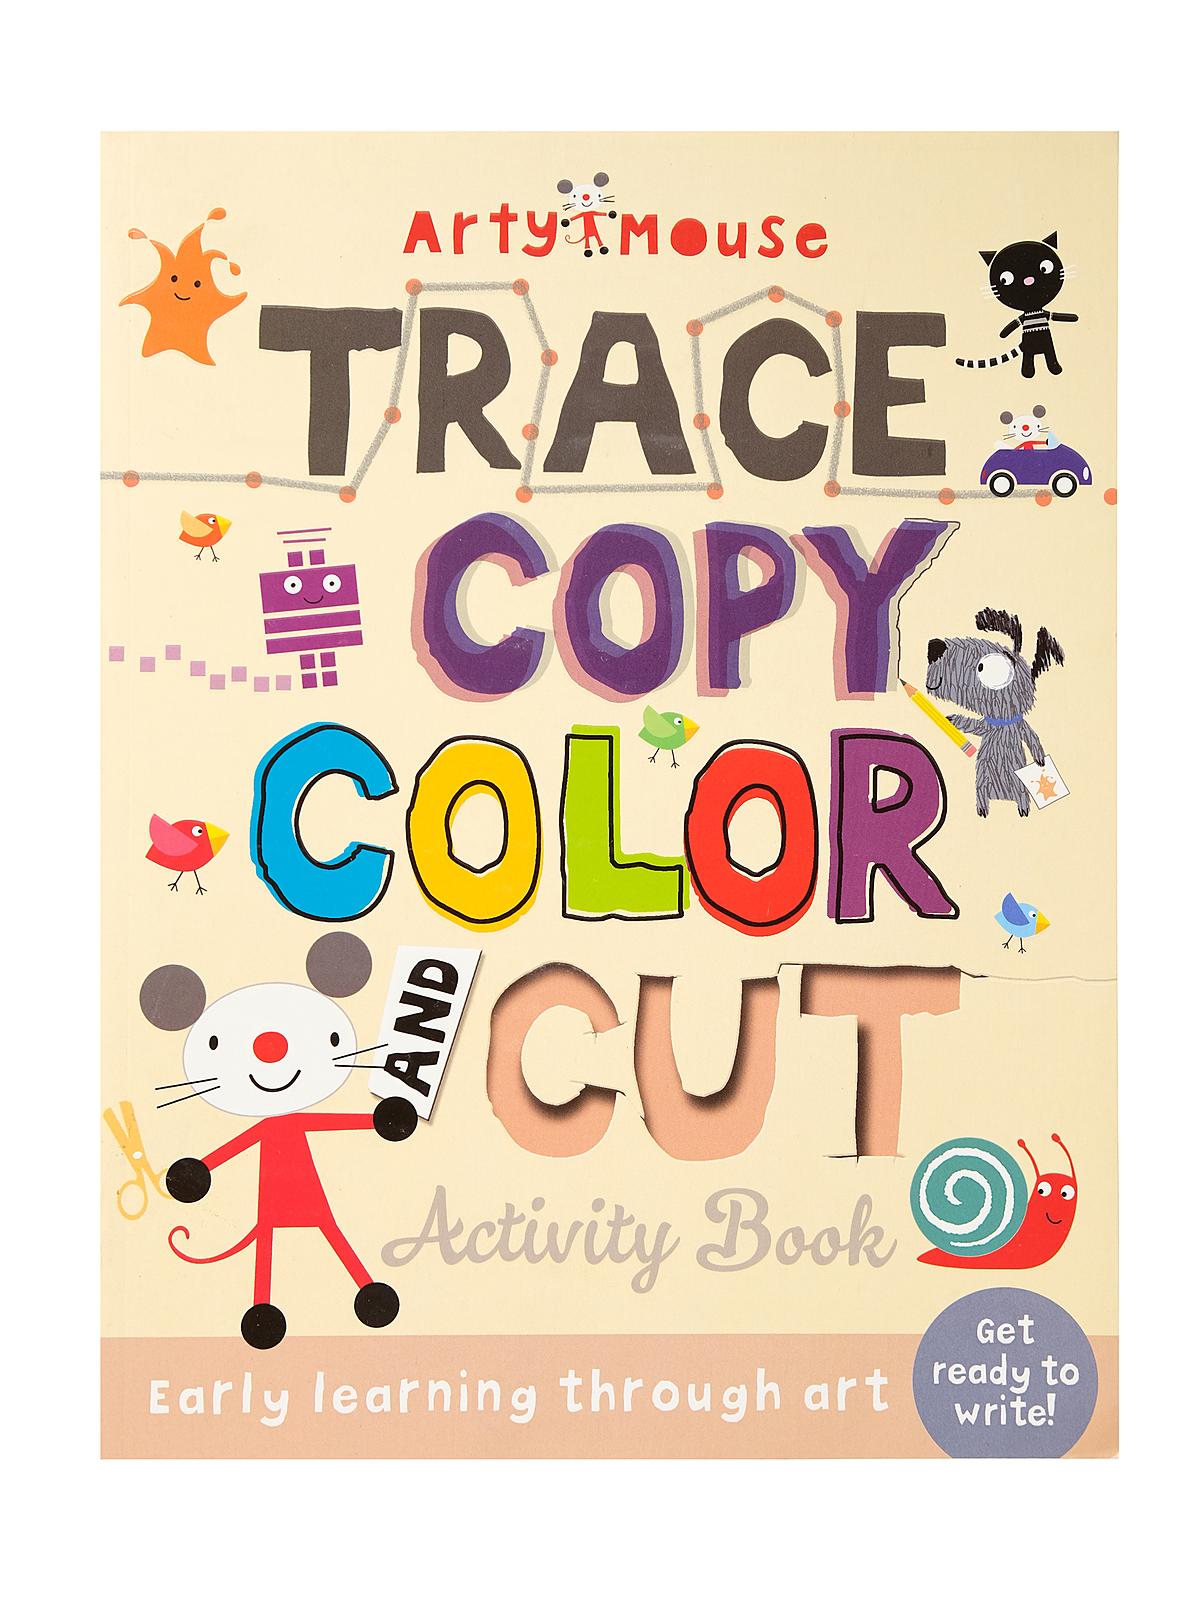 Trace, Copy, Color And Cut Each